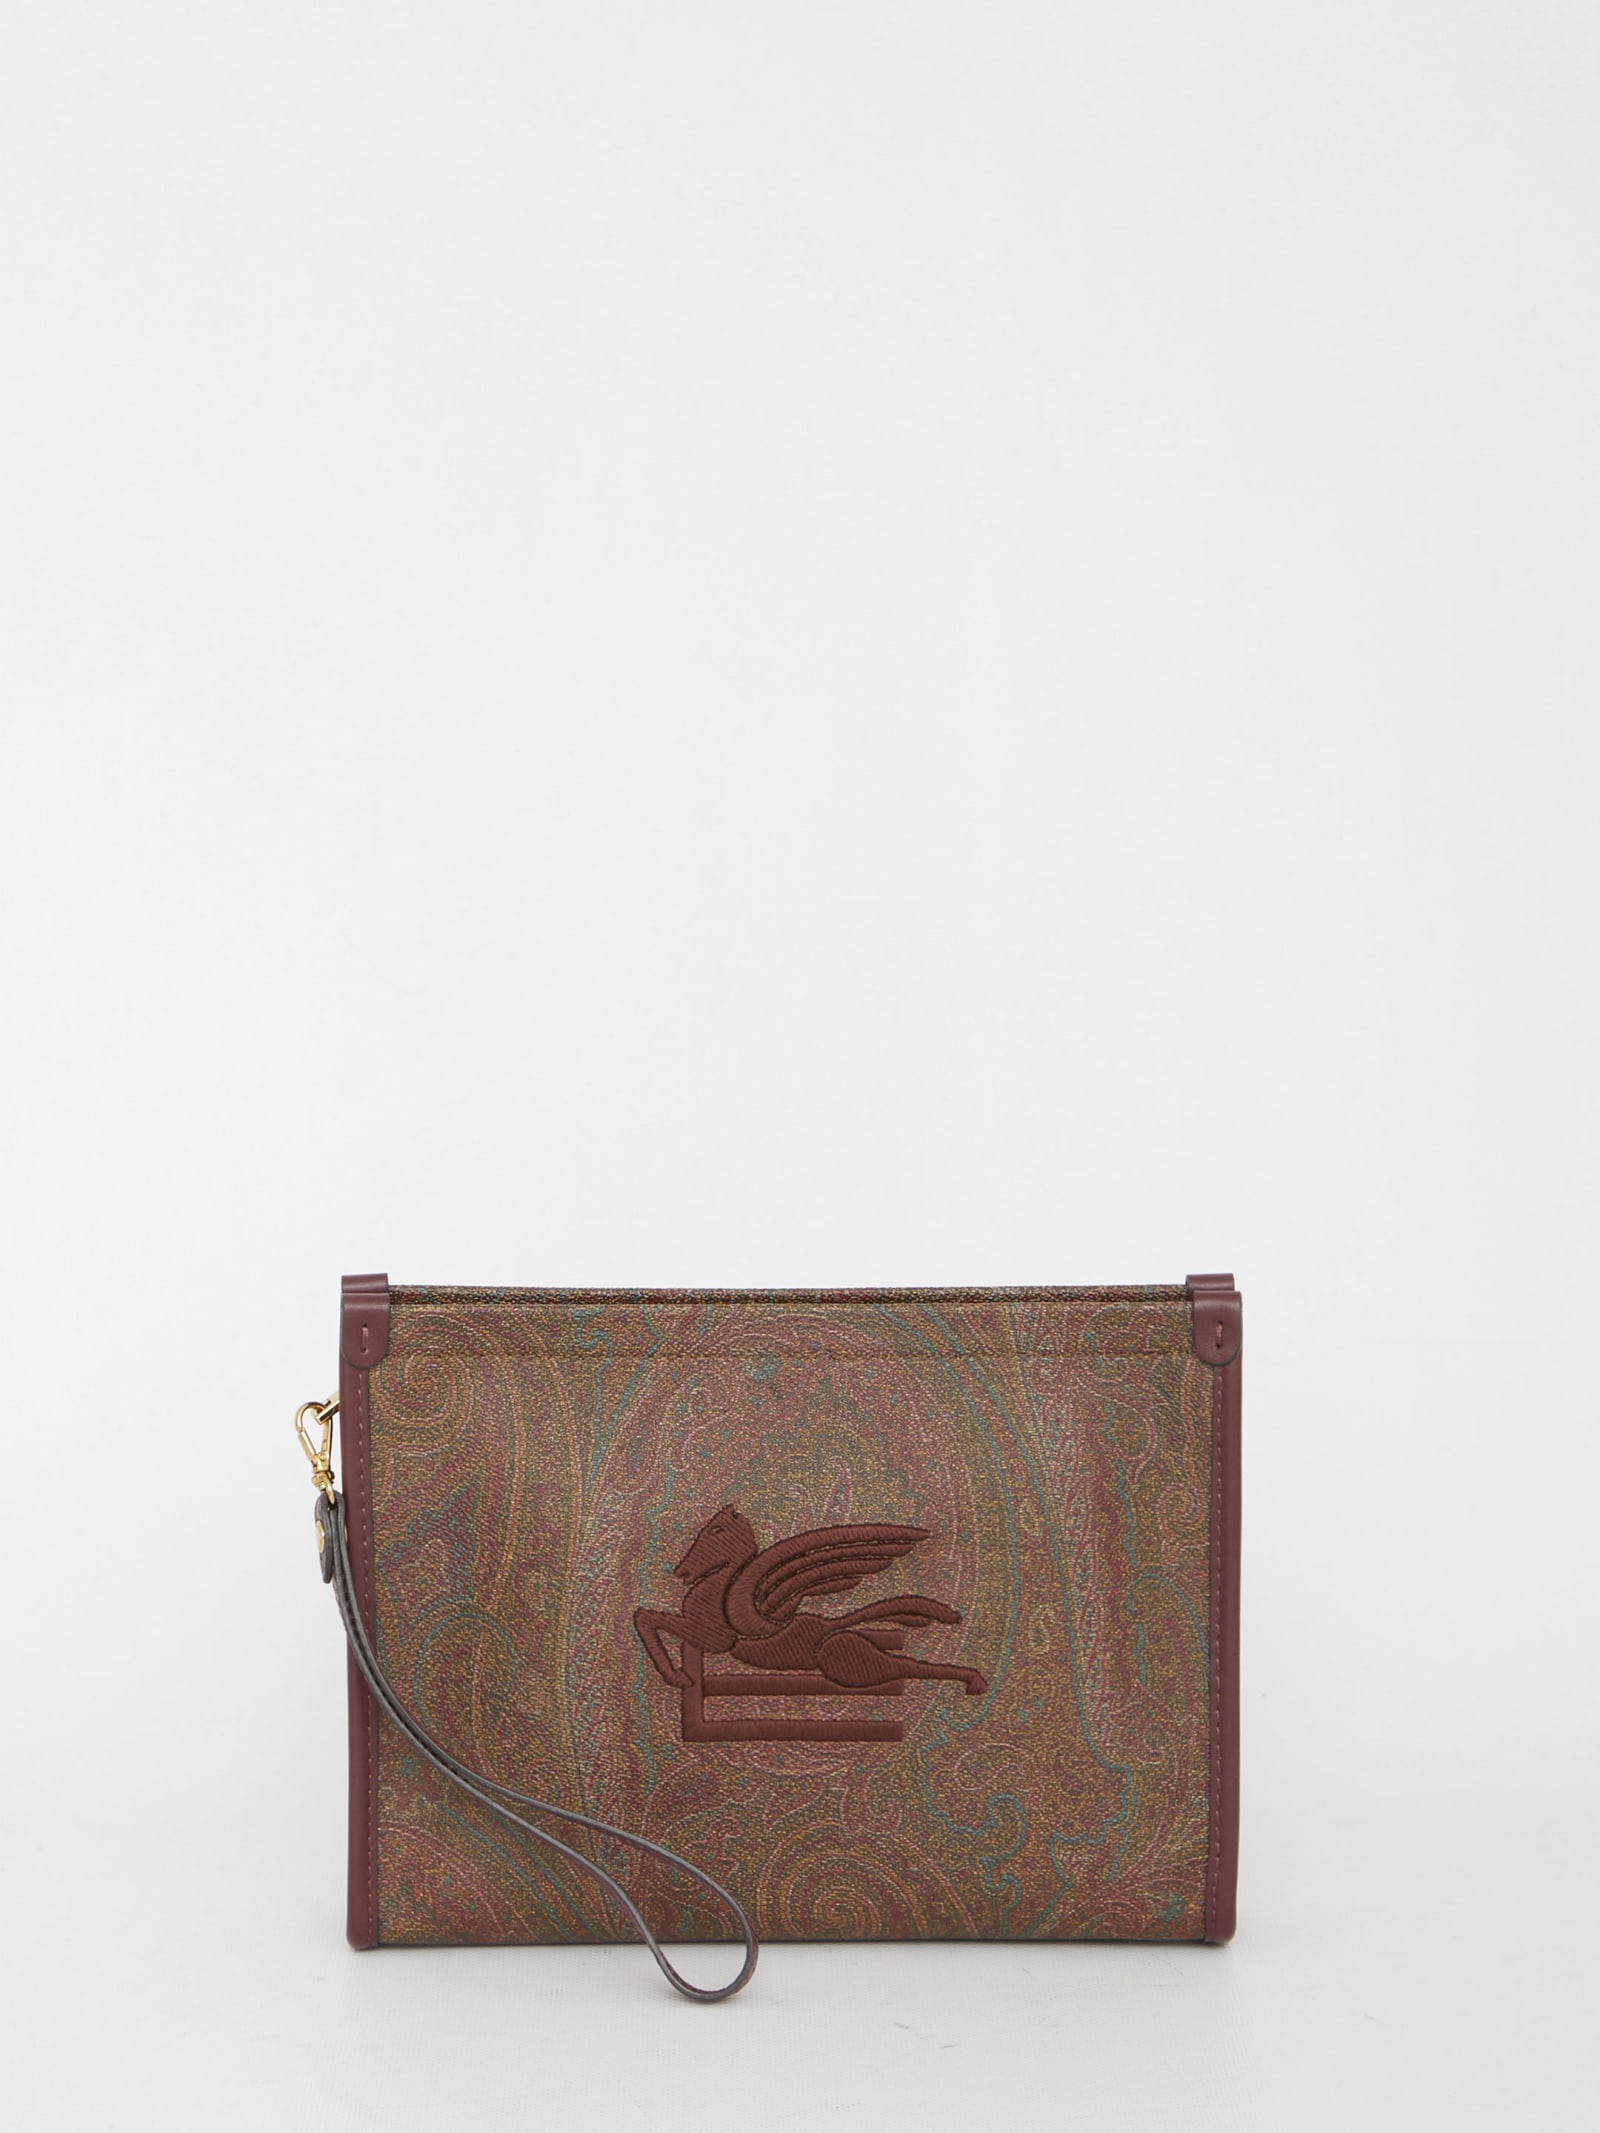 ETRO LOVE TROTTER POUCH